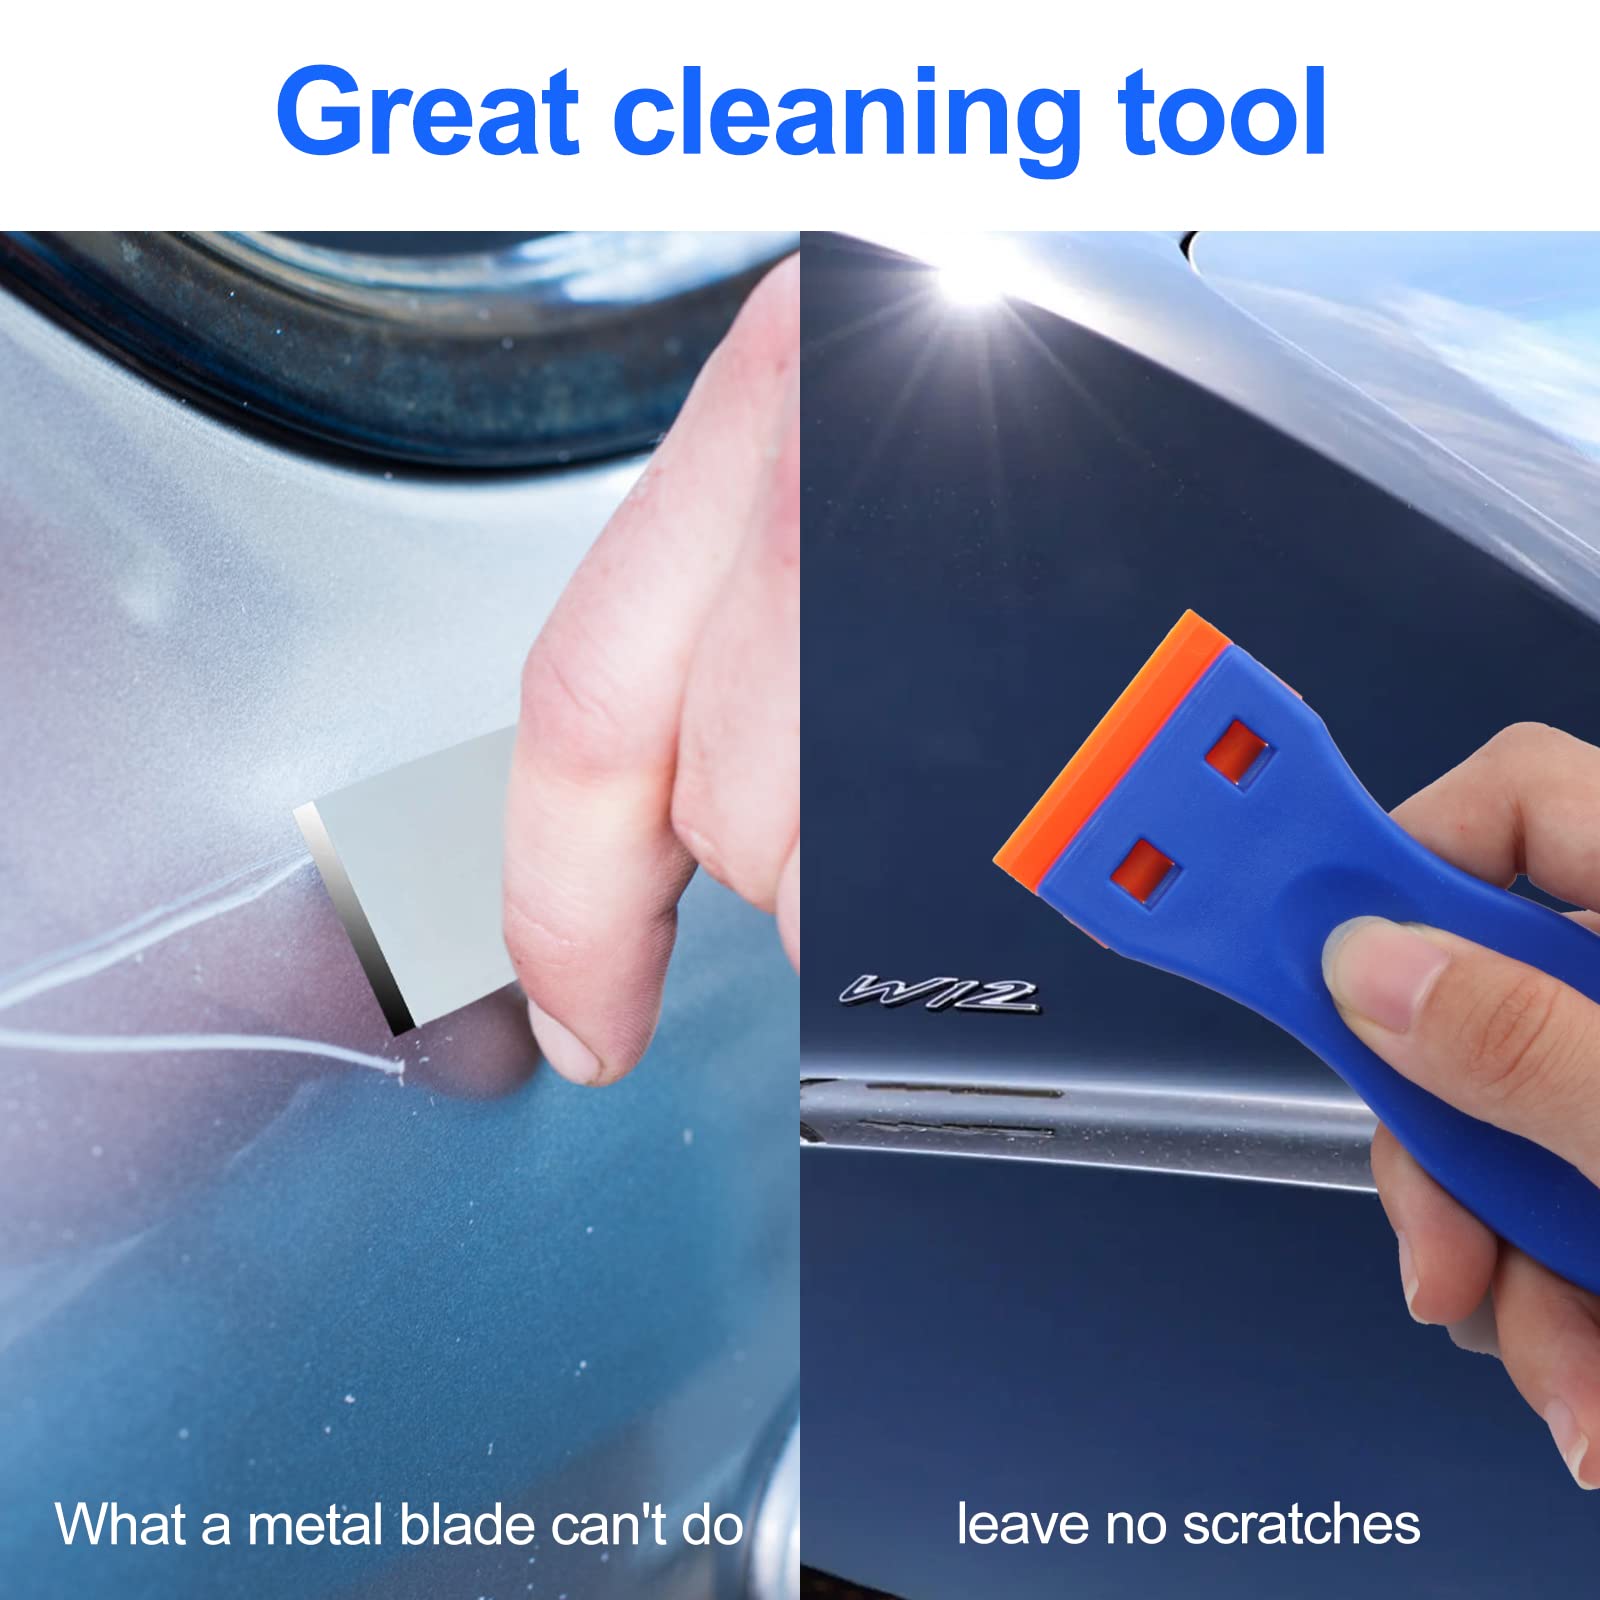 4 Pcs Plastic Razor Blade Scraper and 100 Pcs Blades, Remove Label Decal Tool， Forwithout Scratches Plastic Razor Blade Scraper, Adhesive Remover for Stickers, Gaskets and Paints on Window Car Glass